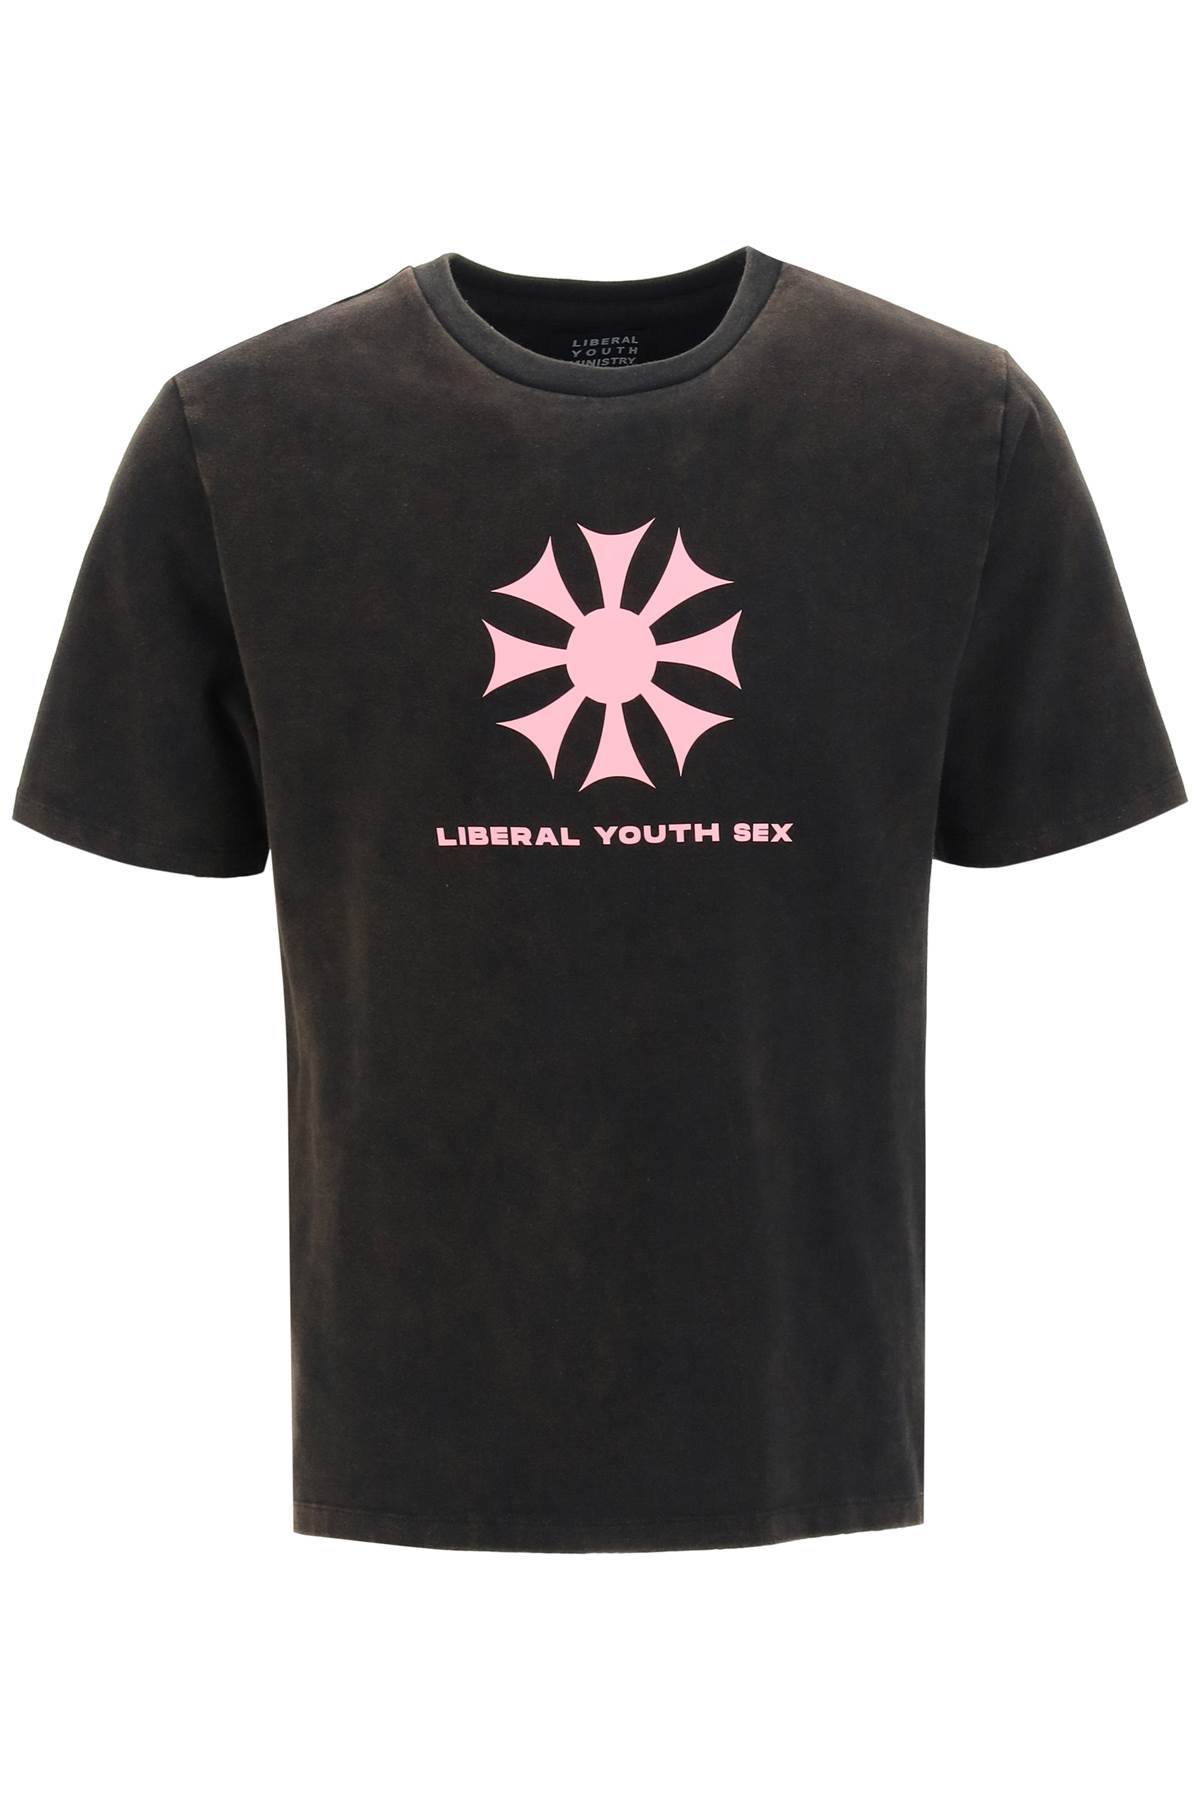 Liberal Youth Ministry Liberal Youth Sex T-shirt